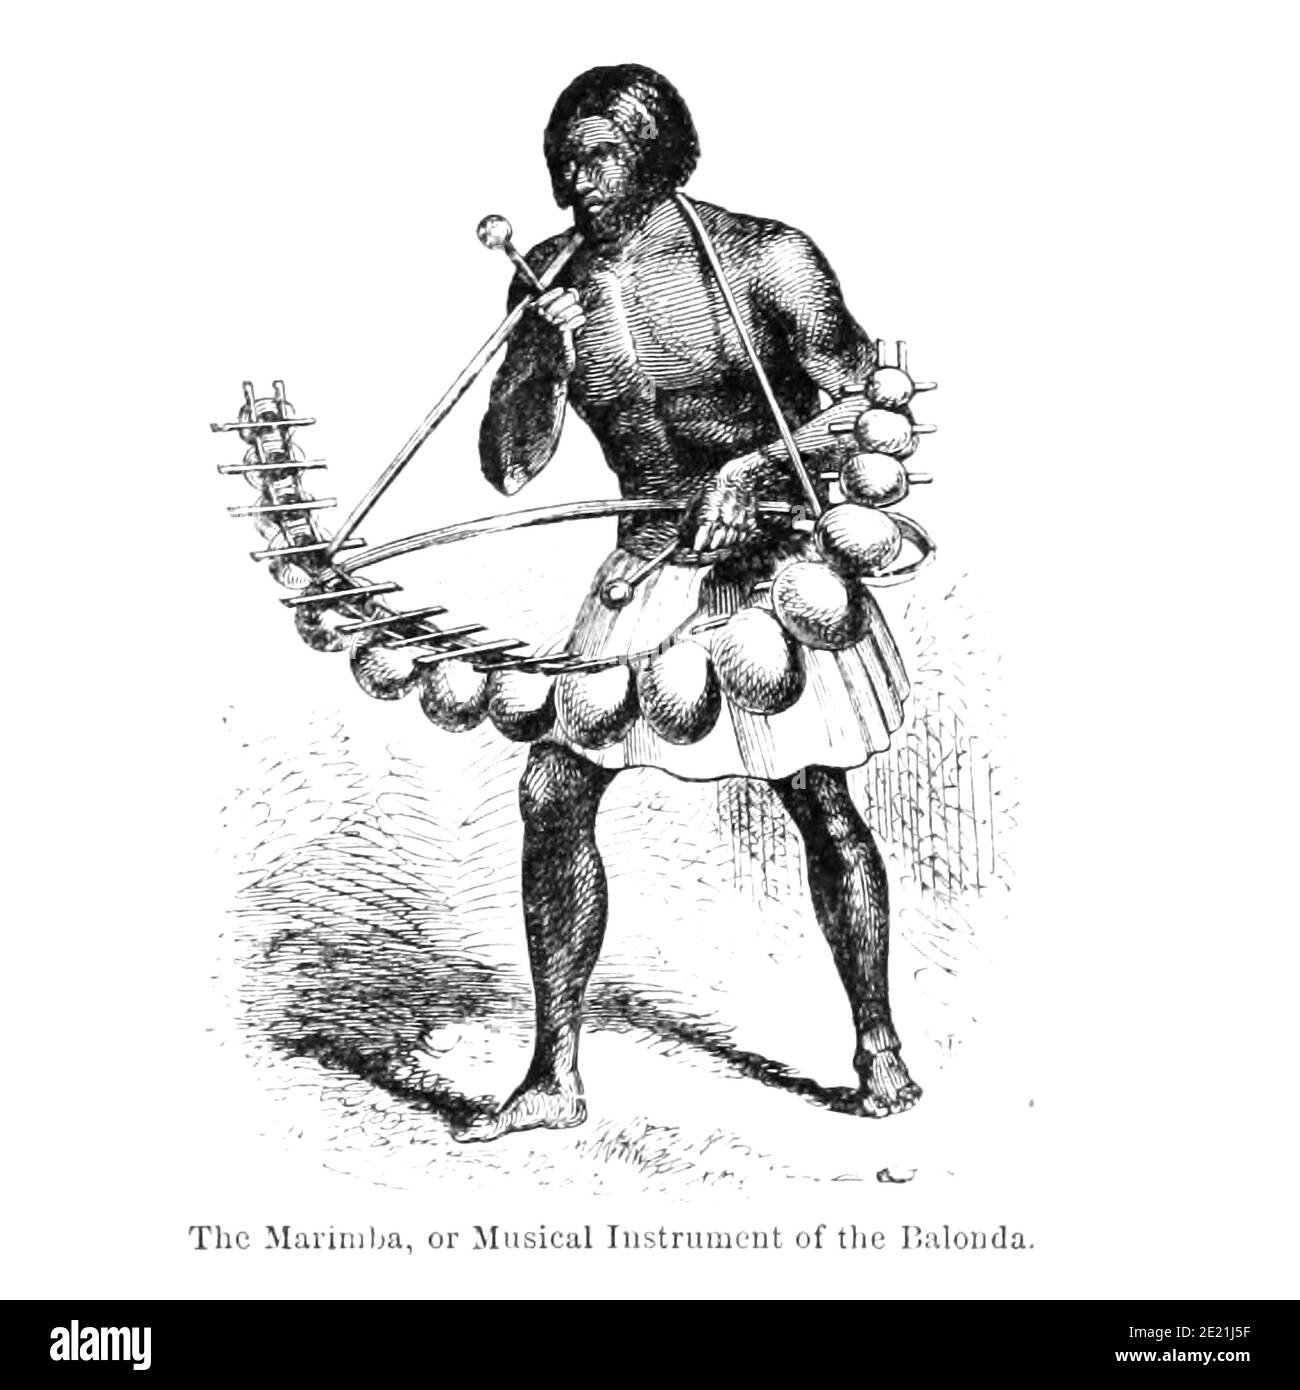 The Marimba, or Musical Instrument of the Balonda From the Book ' Missionary travels and researches in South Africa ' including Sixteen Years Residence in the Interior of Africa. by Dr. David Livingstone Published in New York by Harper & Brothers 1858 Stock Photo